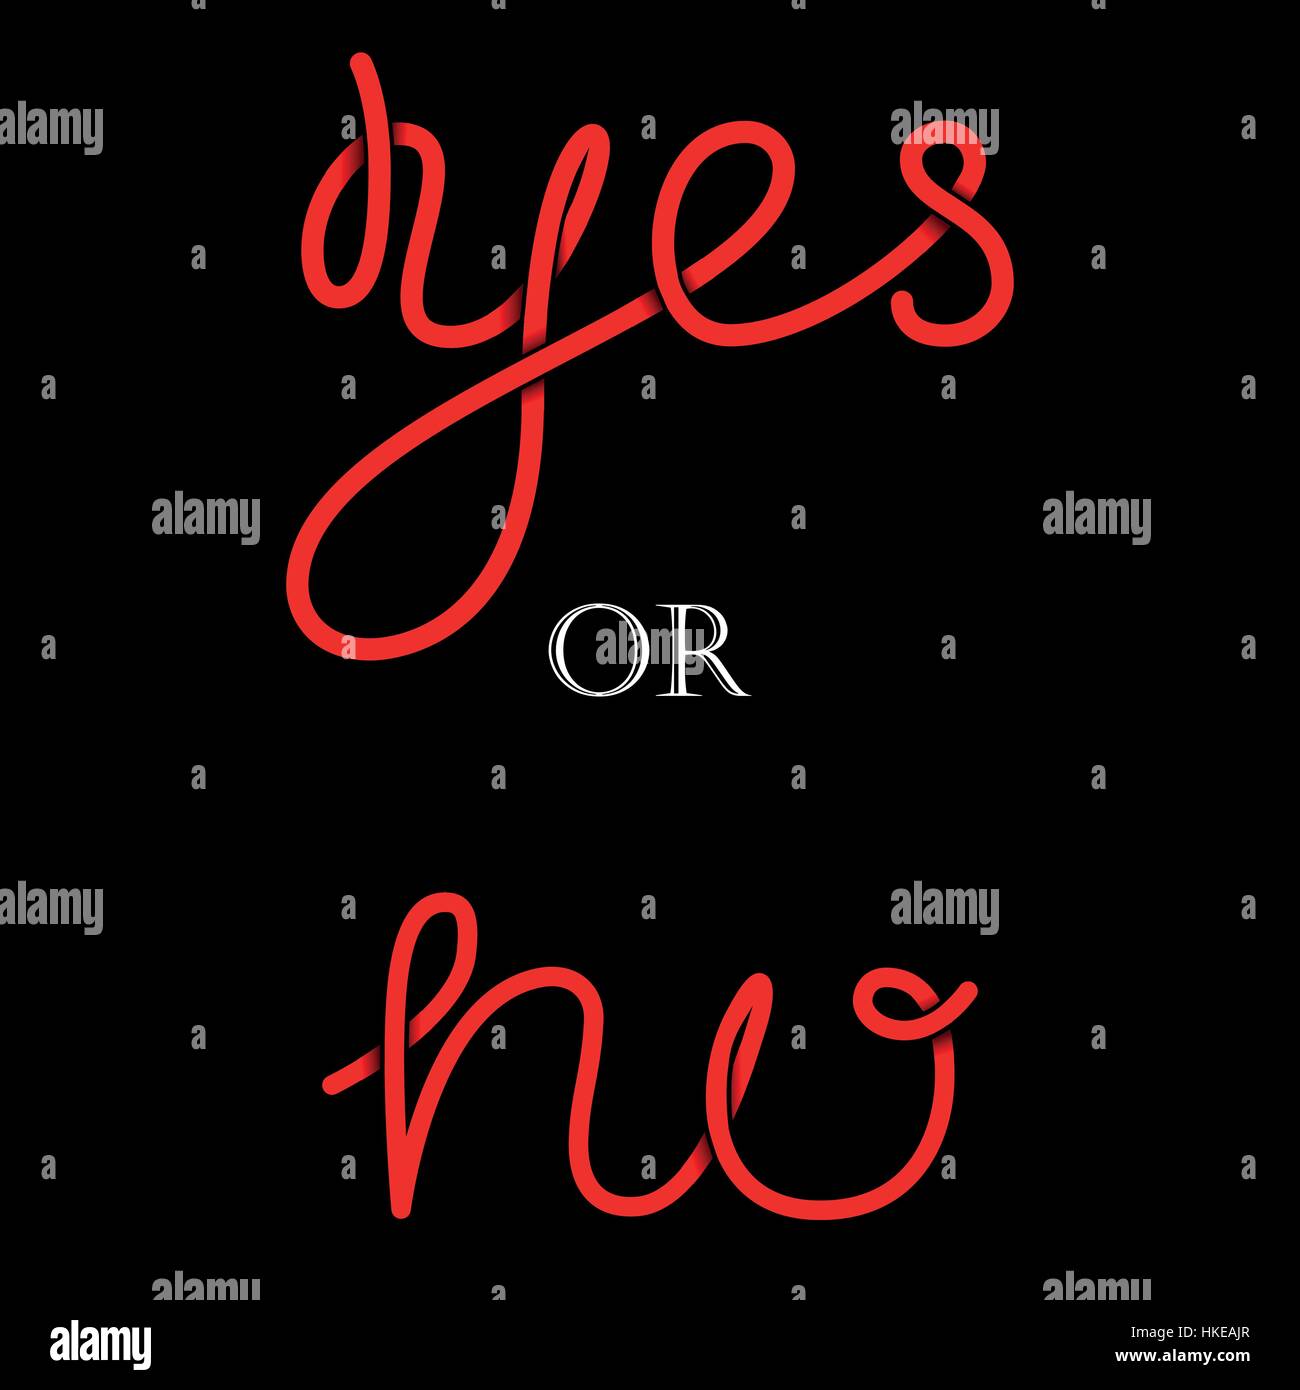 https://c8.alamy.com/comp/HKEAJR/yes-and-no-hand-lettering-calligraphy-vector-HKEAJR.jpg